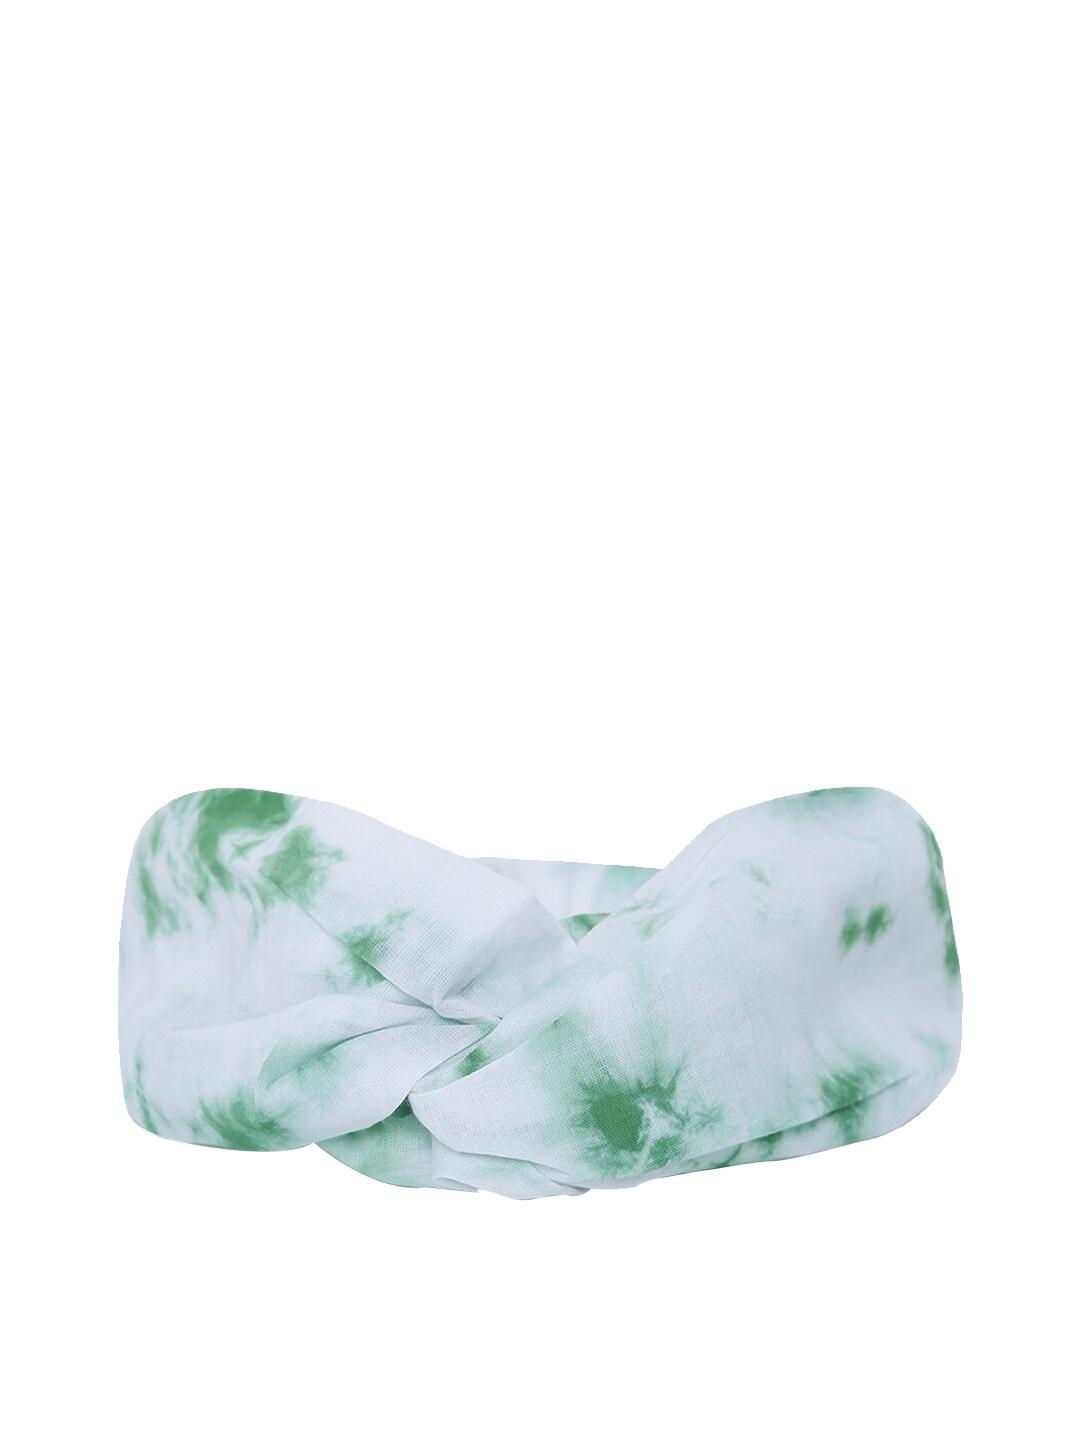 tiber-taber-girls-green-&-white-tie-and-dye-knotted-hairband